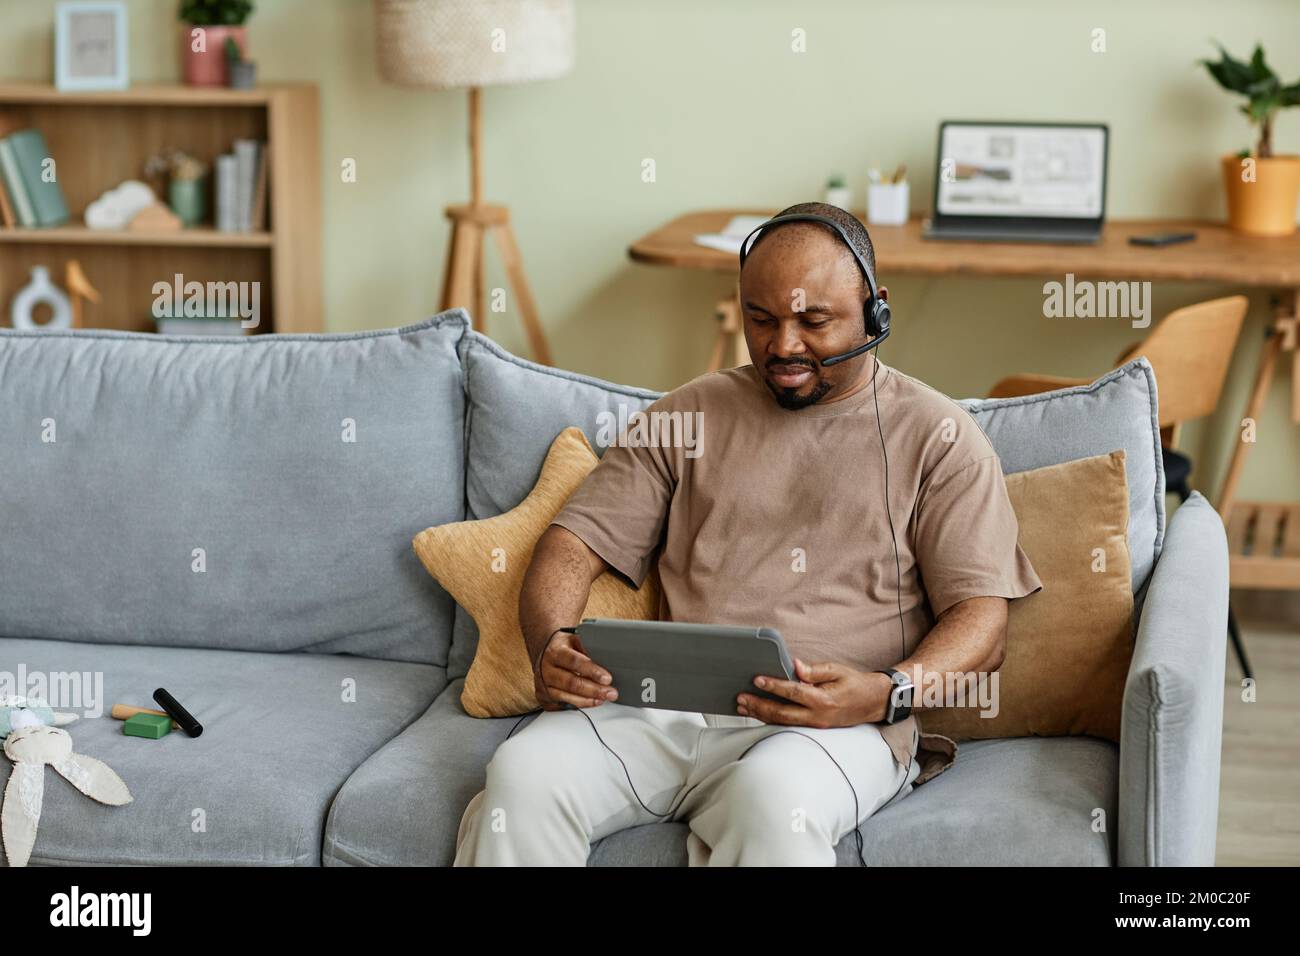 Portrait of adult black man wearing headset using video chat via tablet in cozy home interior, copy space Stock Photo